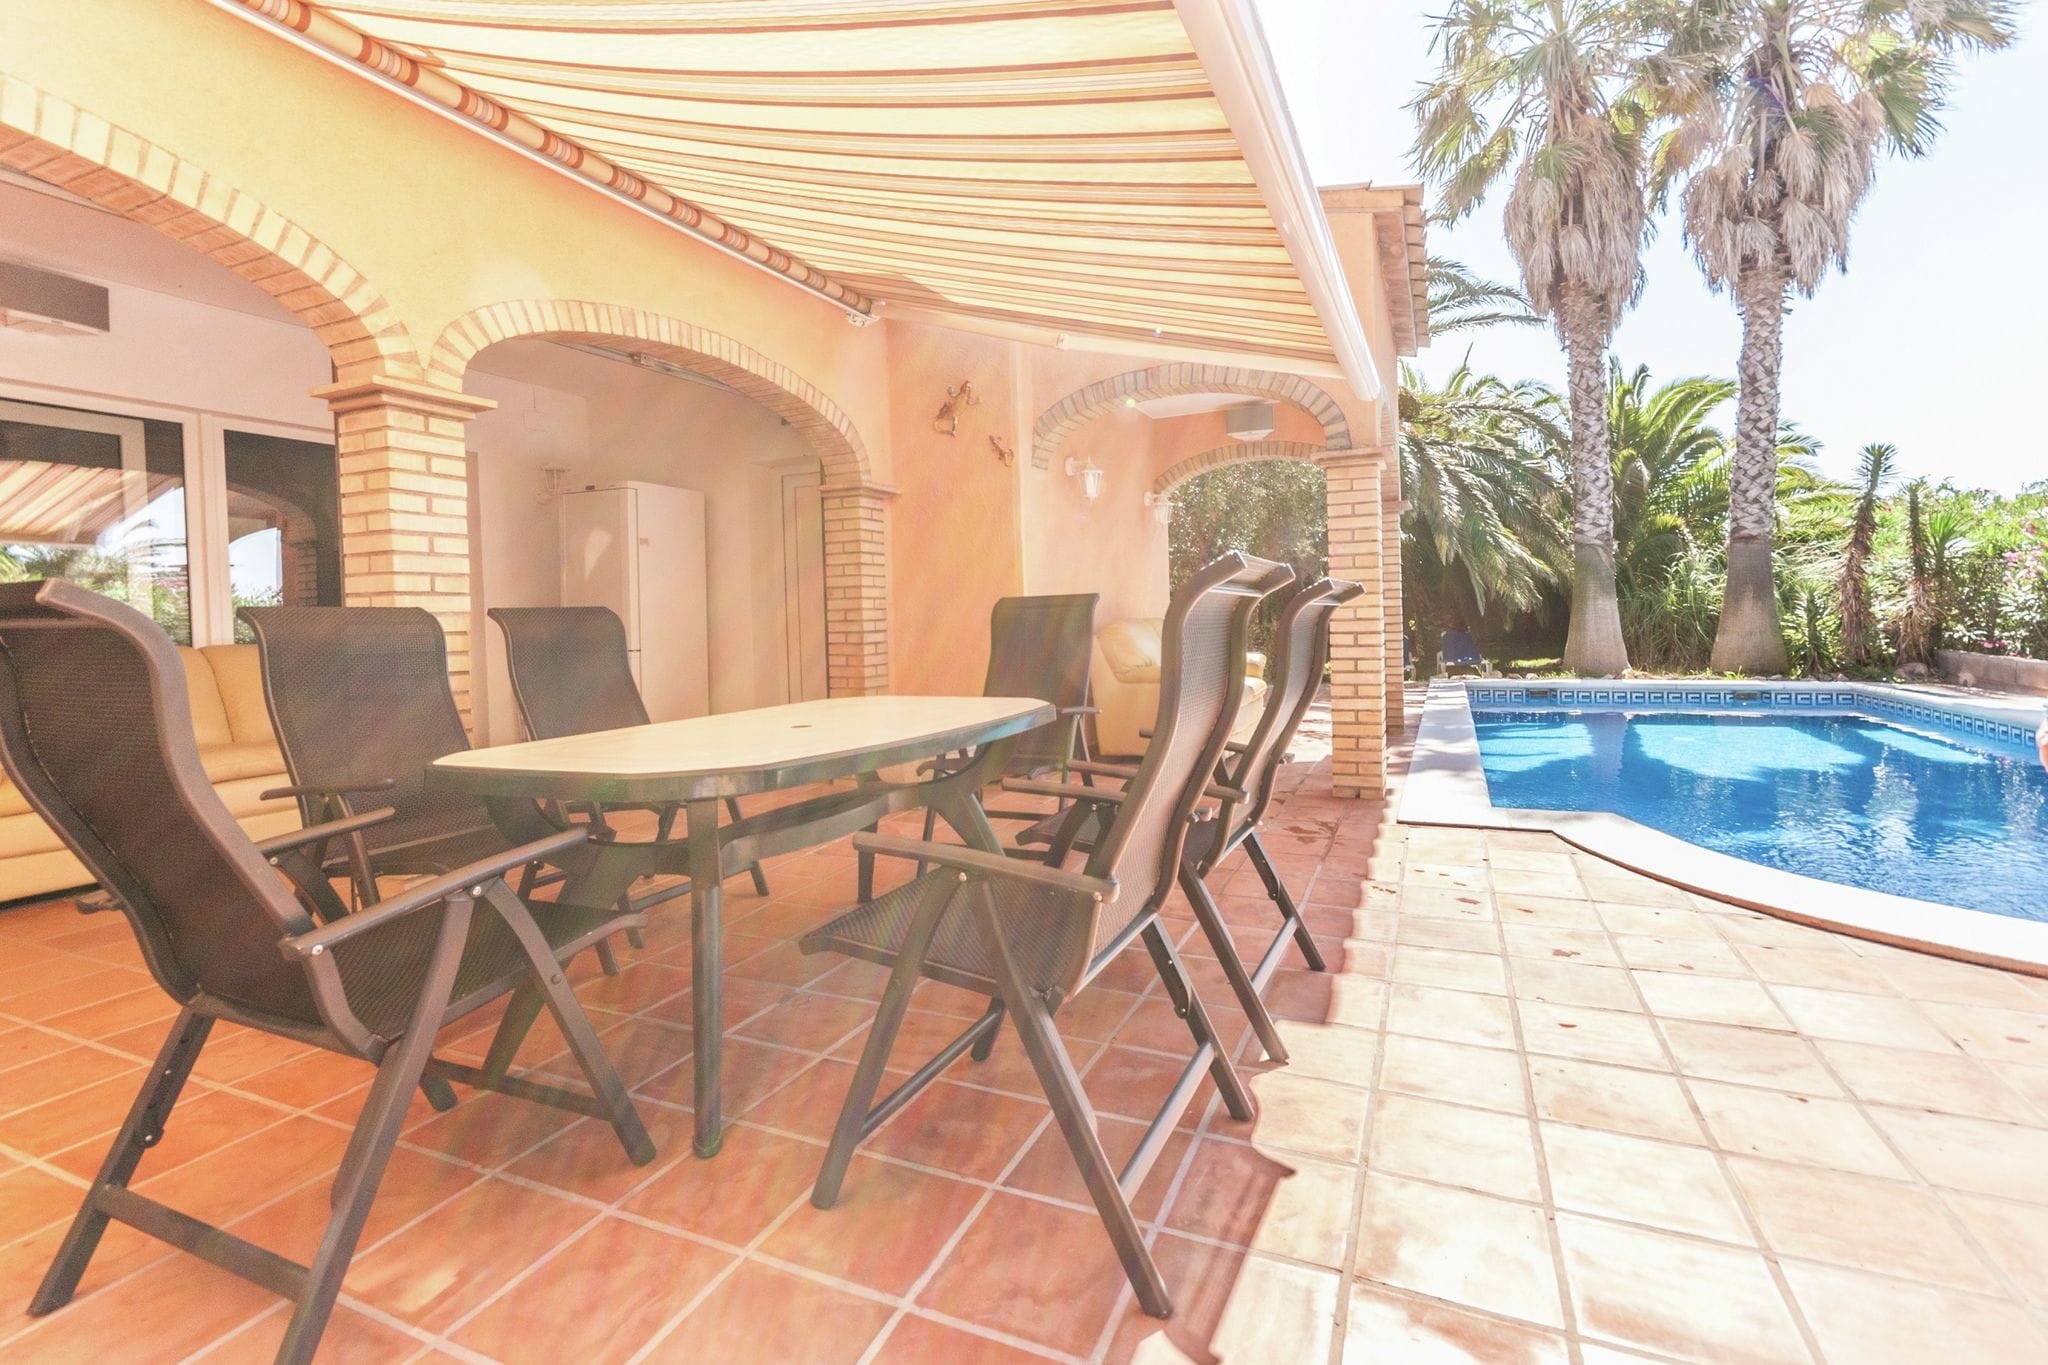 Fantastic holiday home with private pool at the port including a private berth